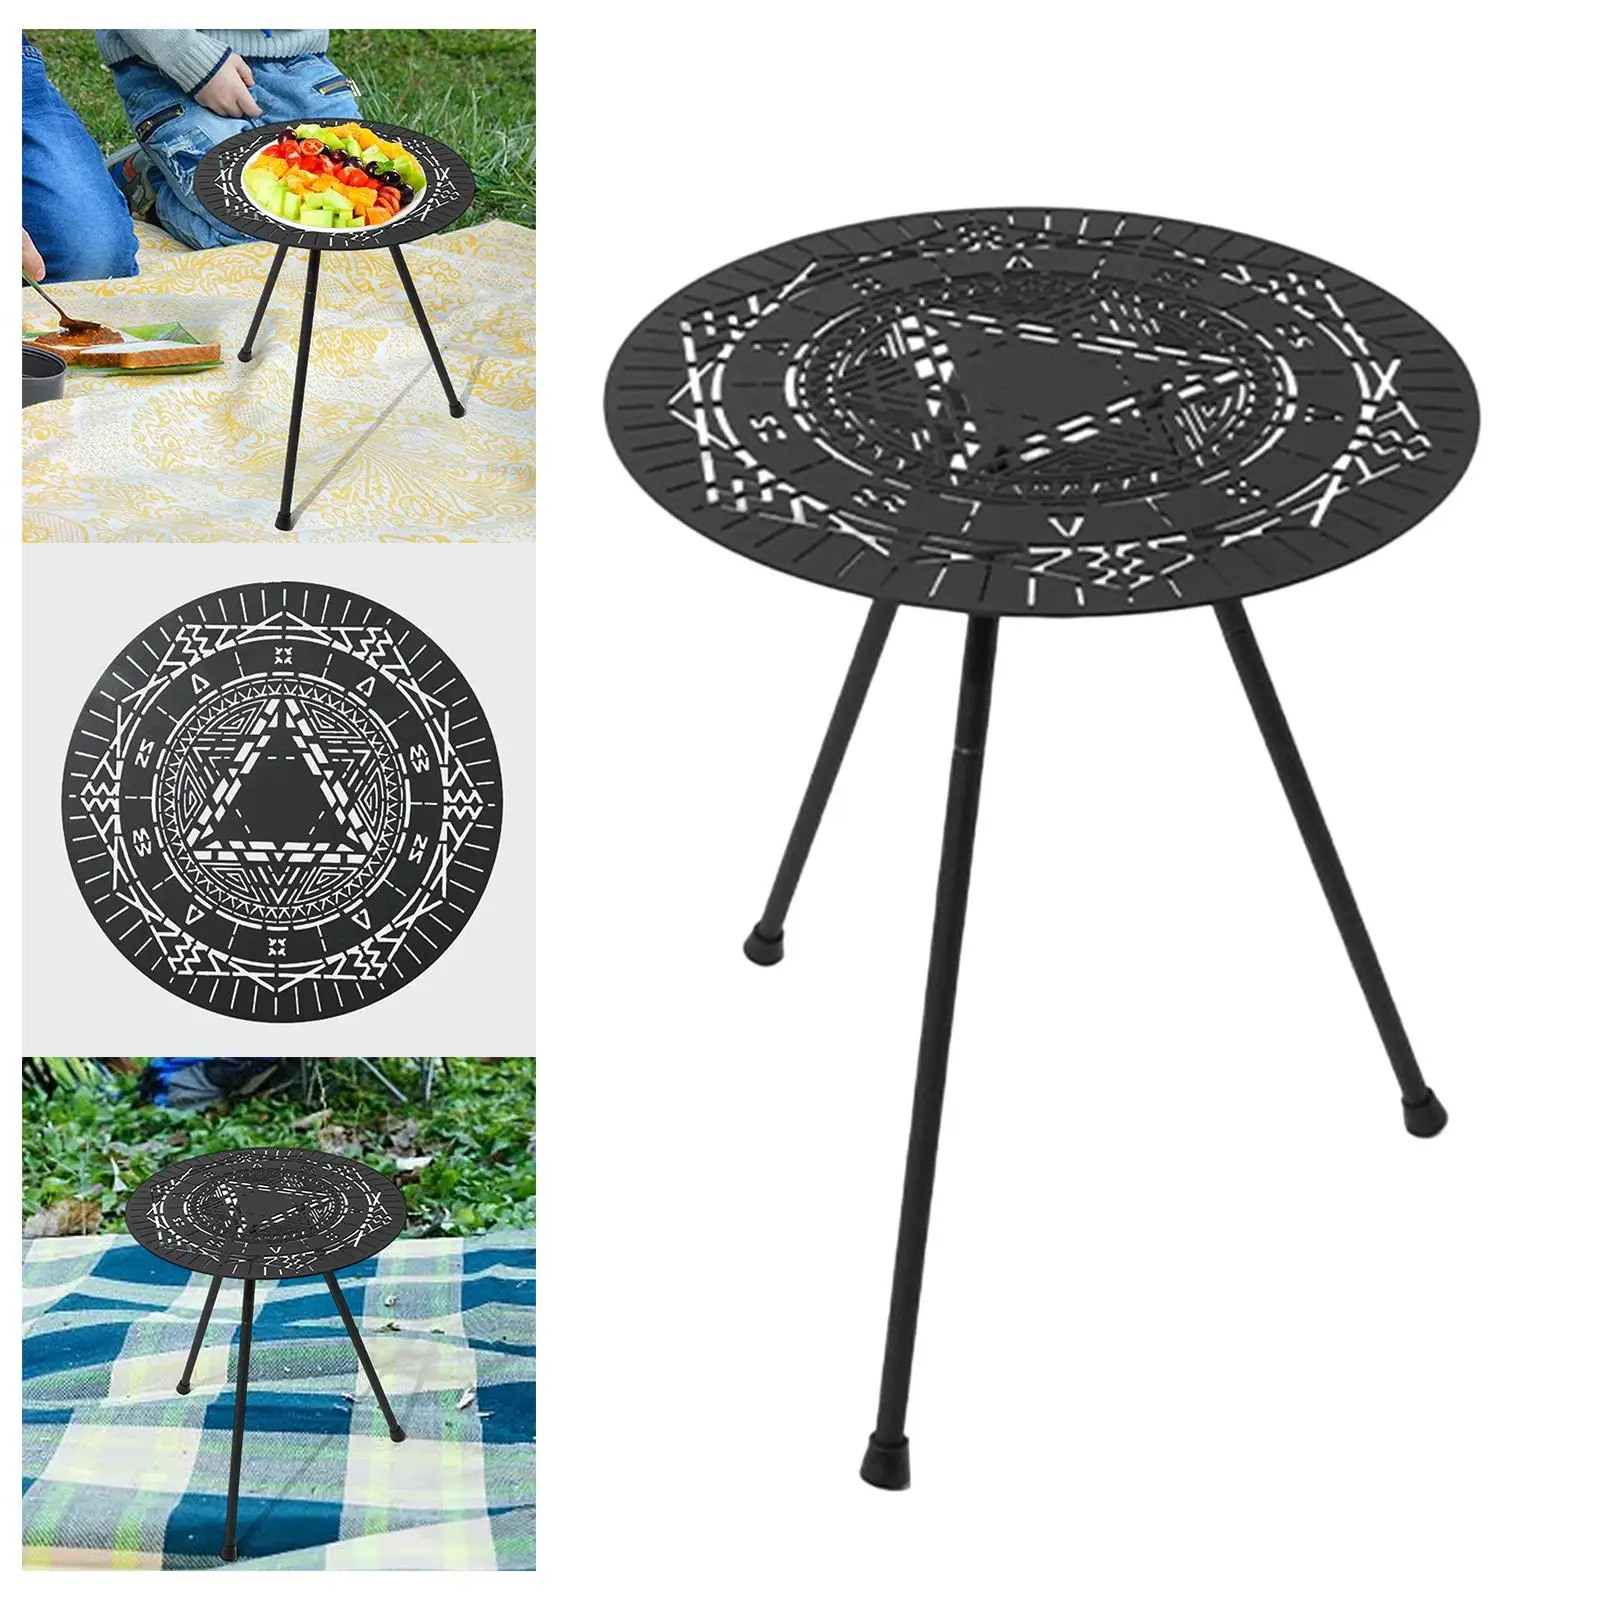 Camping Coffee Table Collapsible Lightweight Durable Adjustable Camping Table Detachable for Outdoor Backyard Yard Garden Picnic